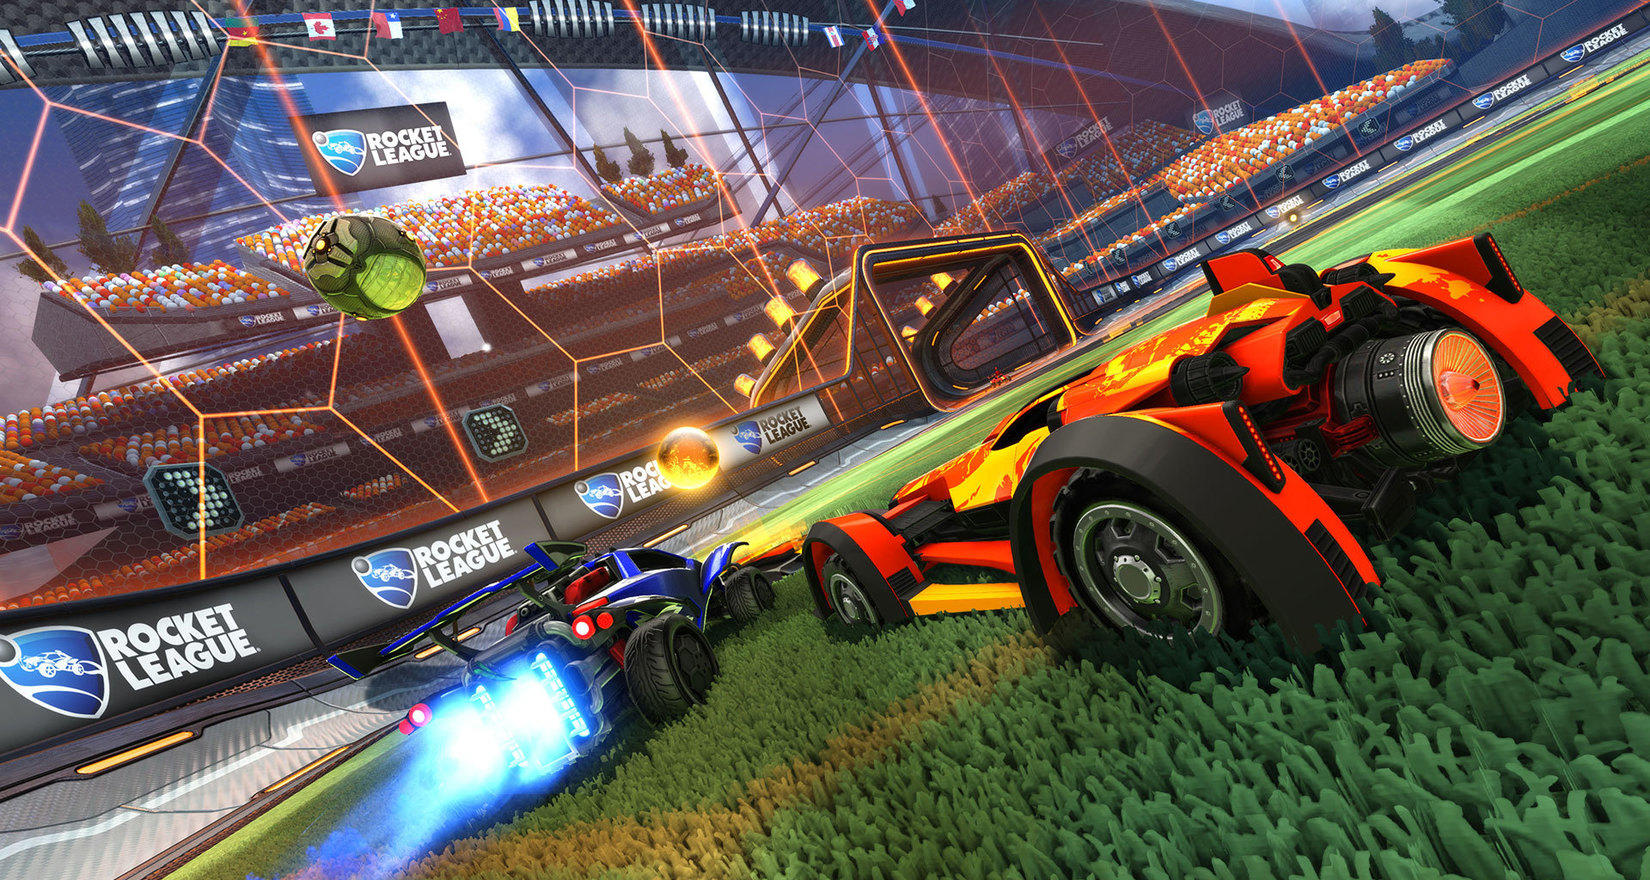 Rocket League Ultimate Edition Races Out A Release Date This August